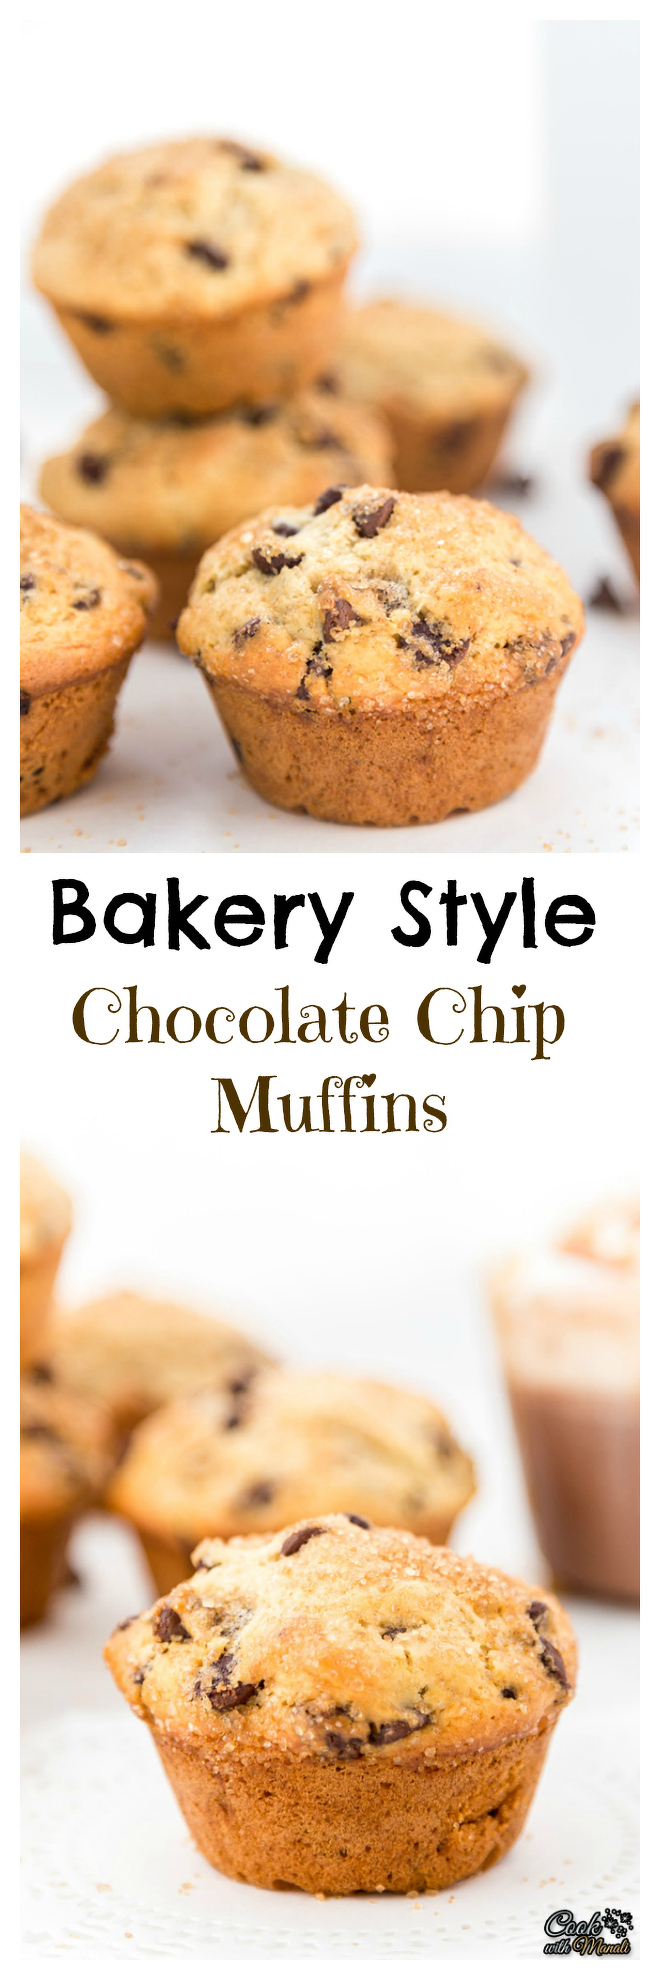 Bakery Style Chocolate Chip Muffins Collage-nocwm